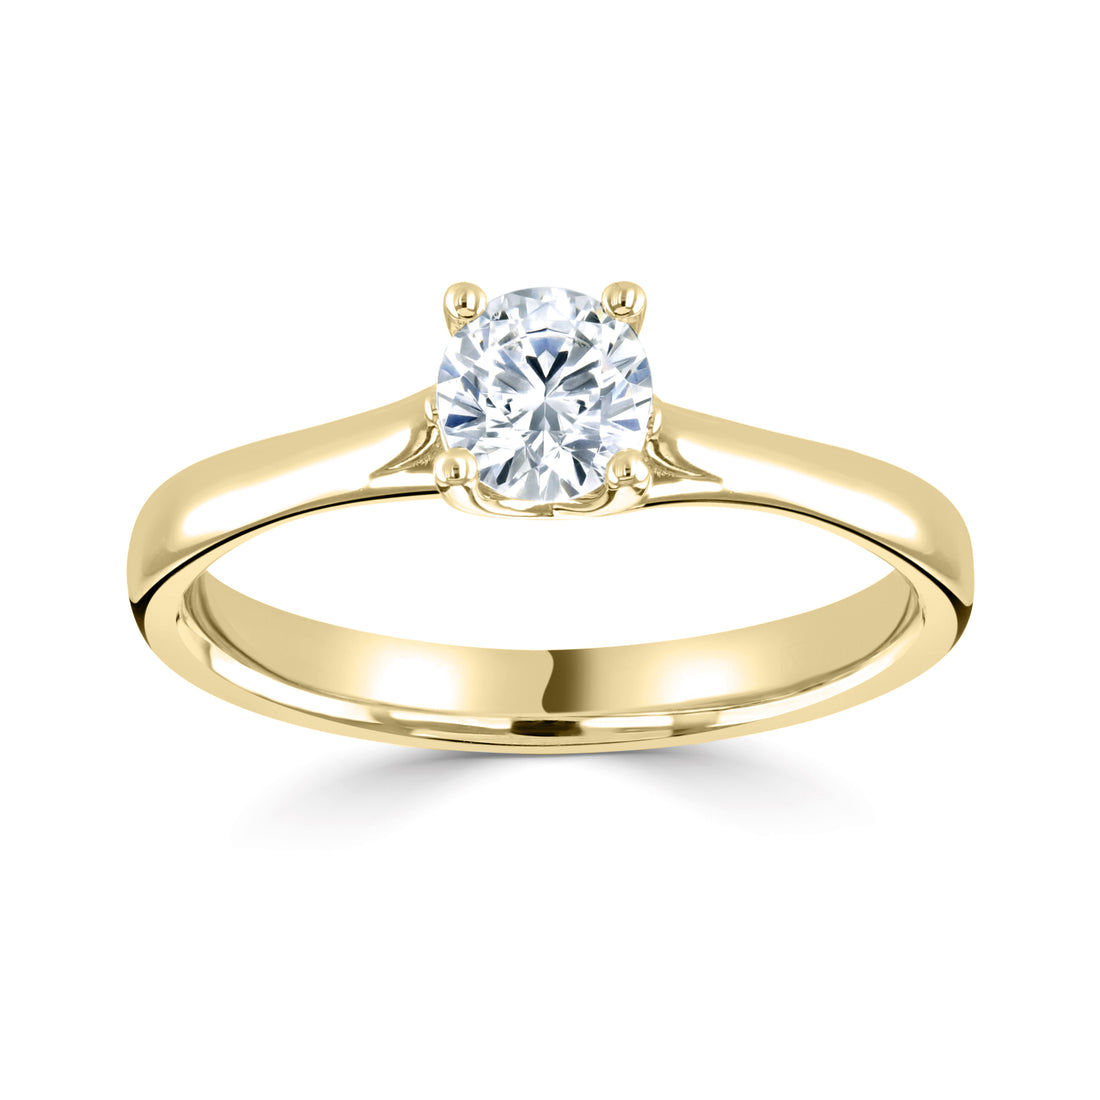 ALICIA — 18CT Yellow Gold with 0.8ct Lab Grown Diamond Ring 0.8ct